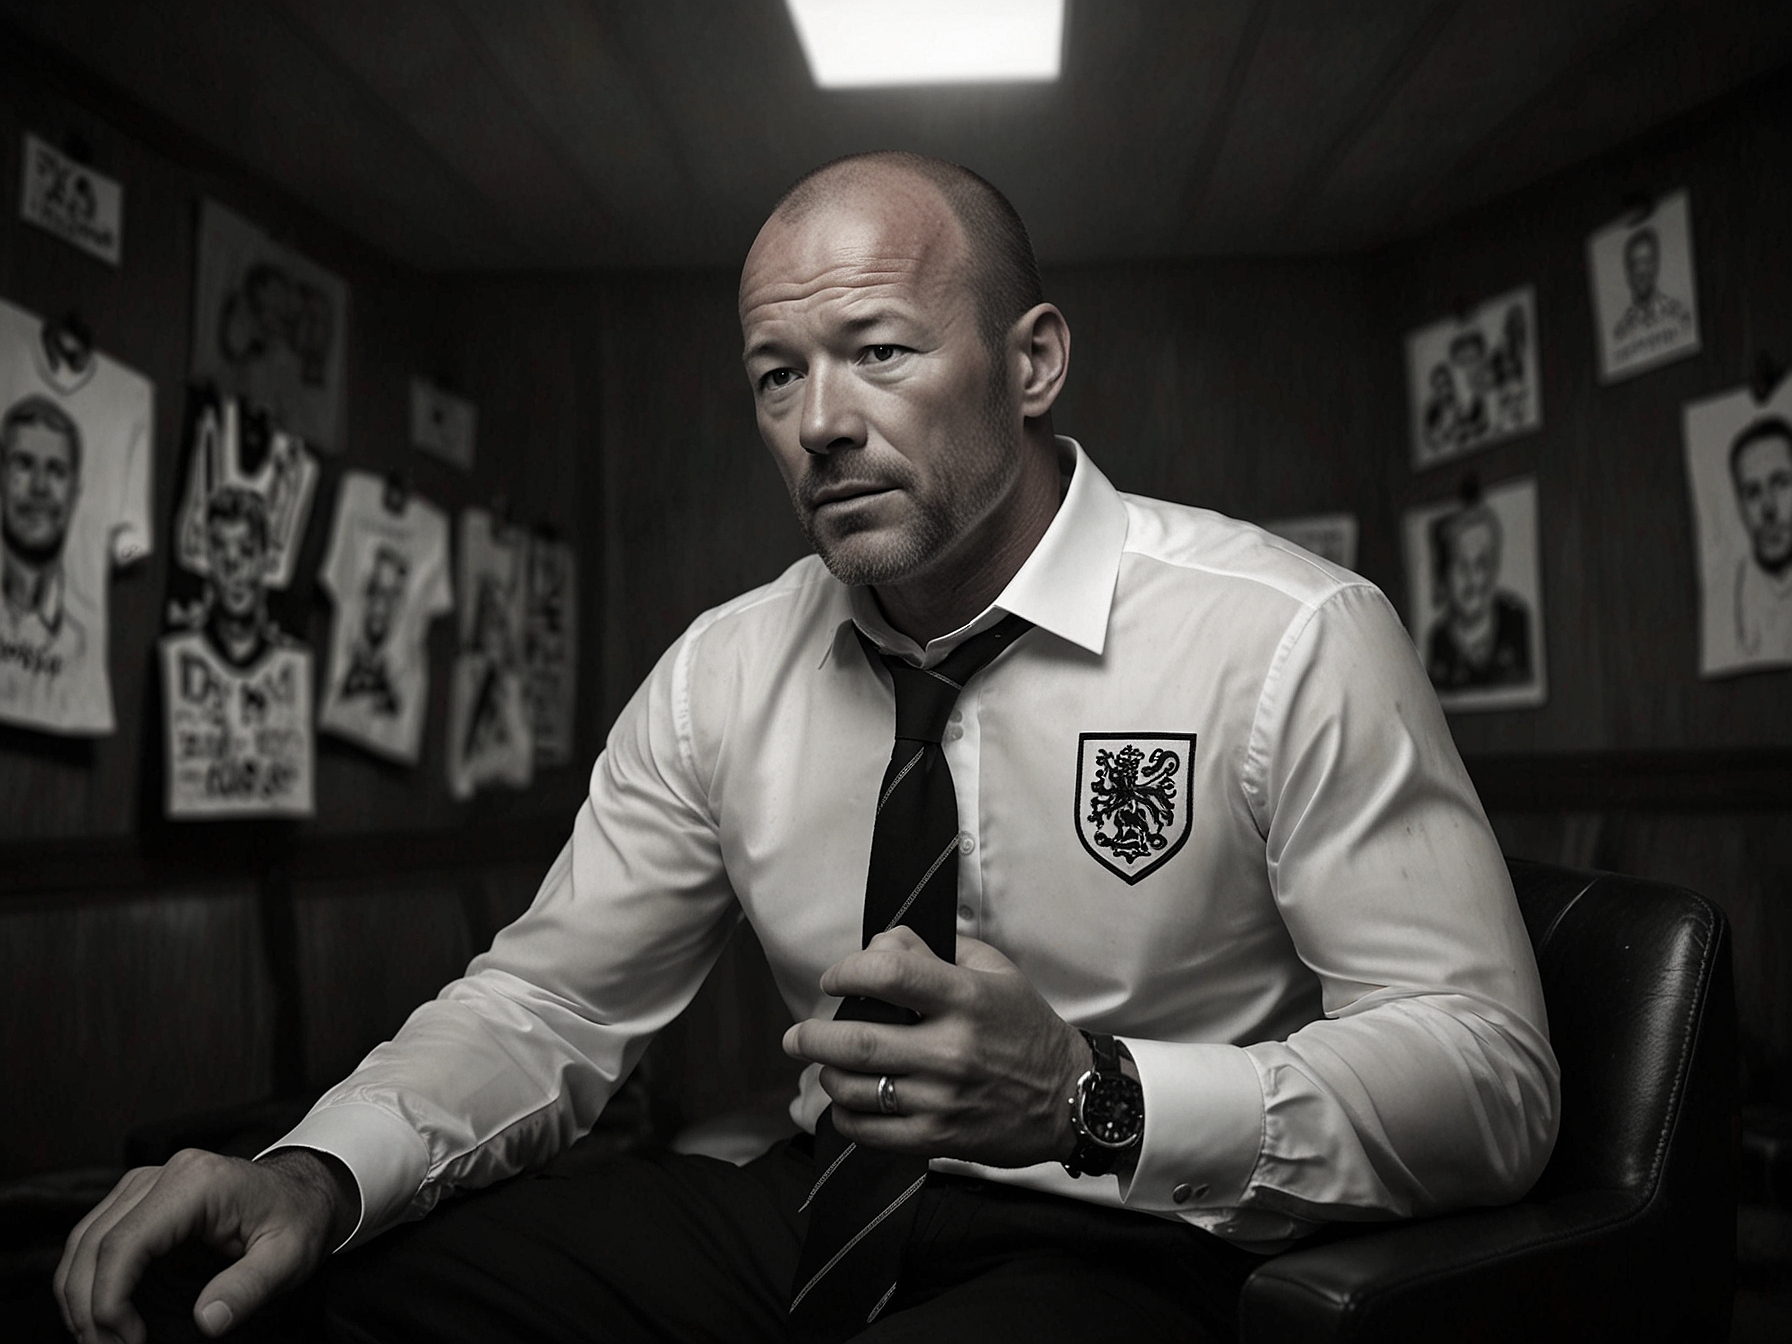 Former England captain Alan Shearer addressing the current squad, sharing his experiences and advice to help them cope with the pressures and expectations of the high-stakes tournament.